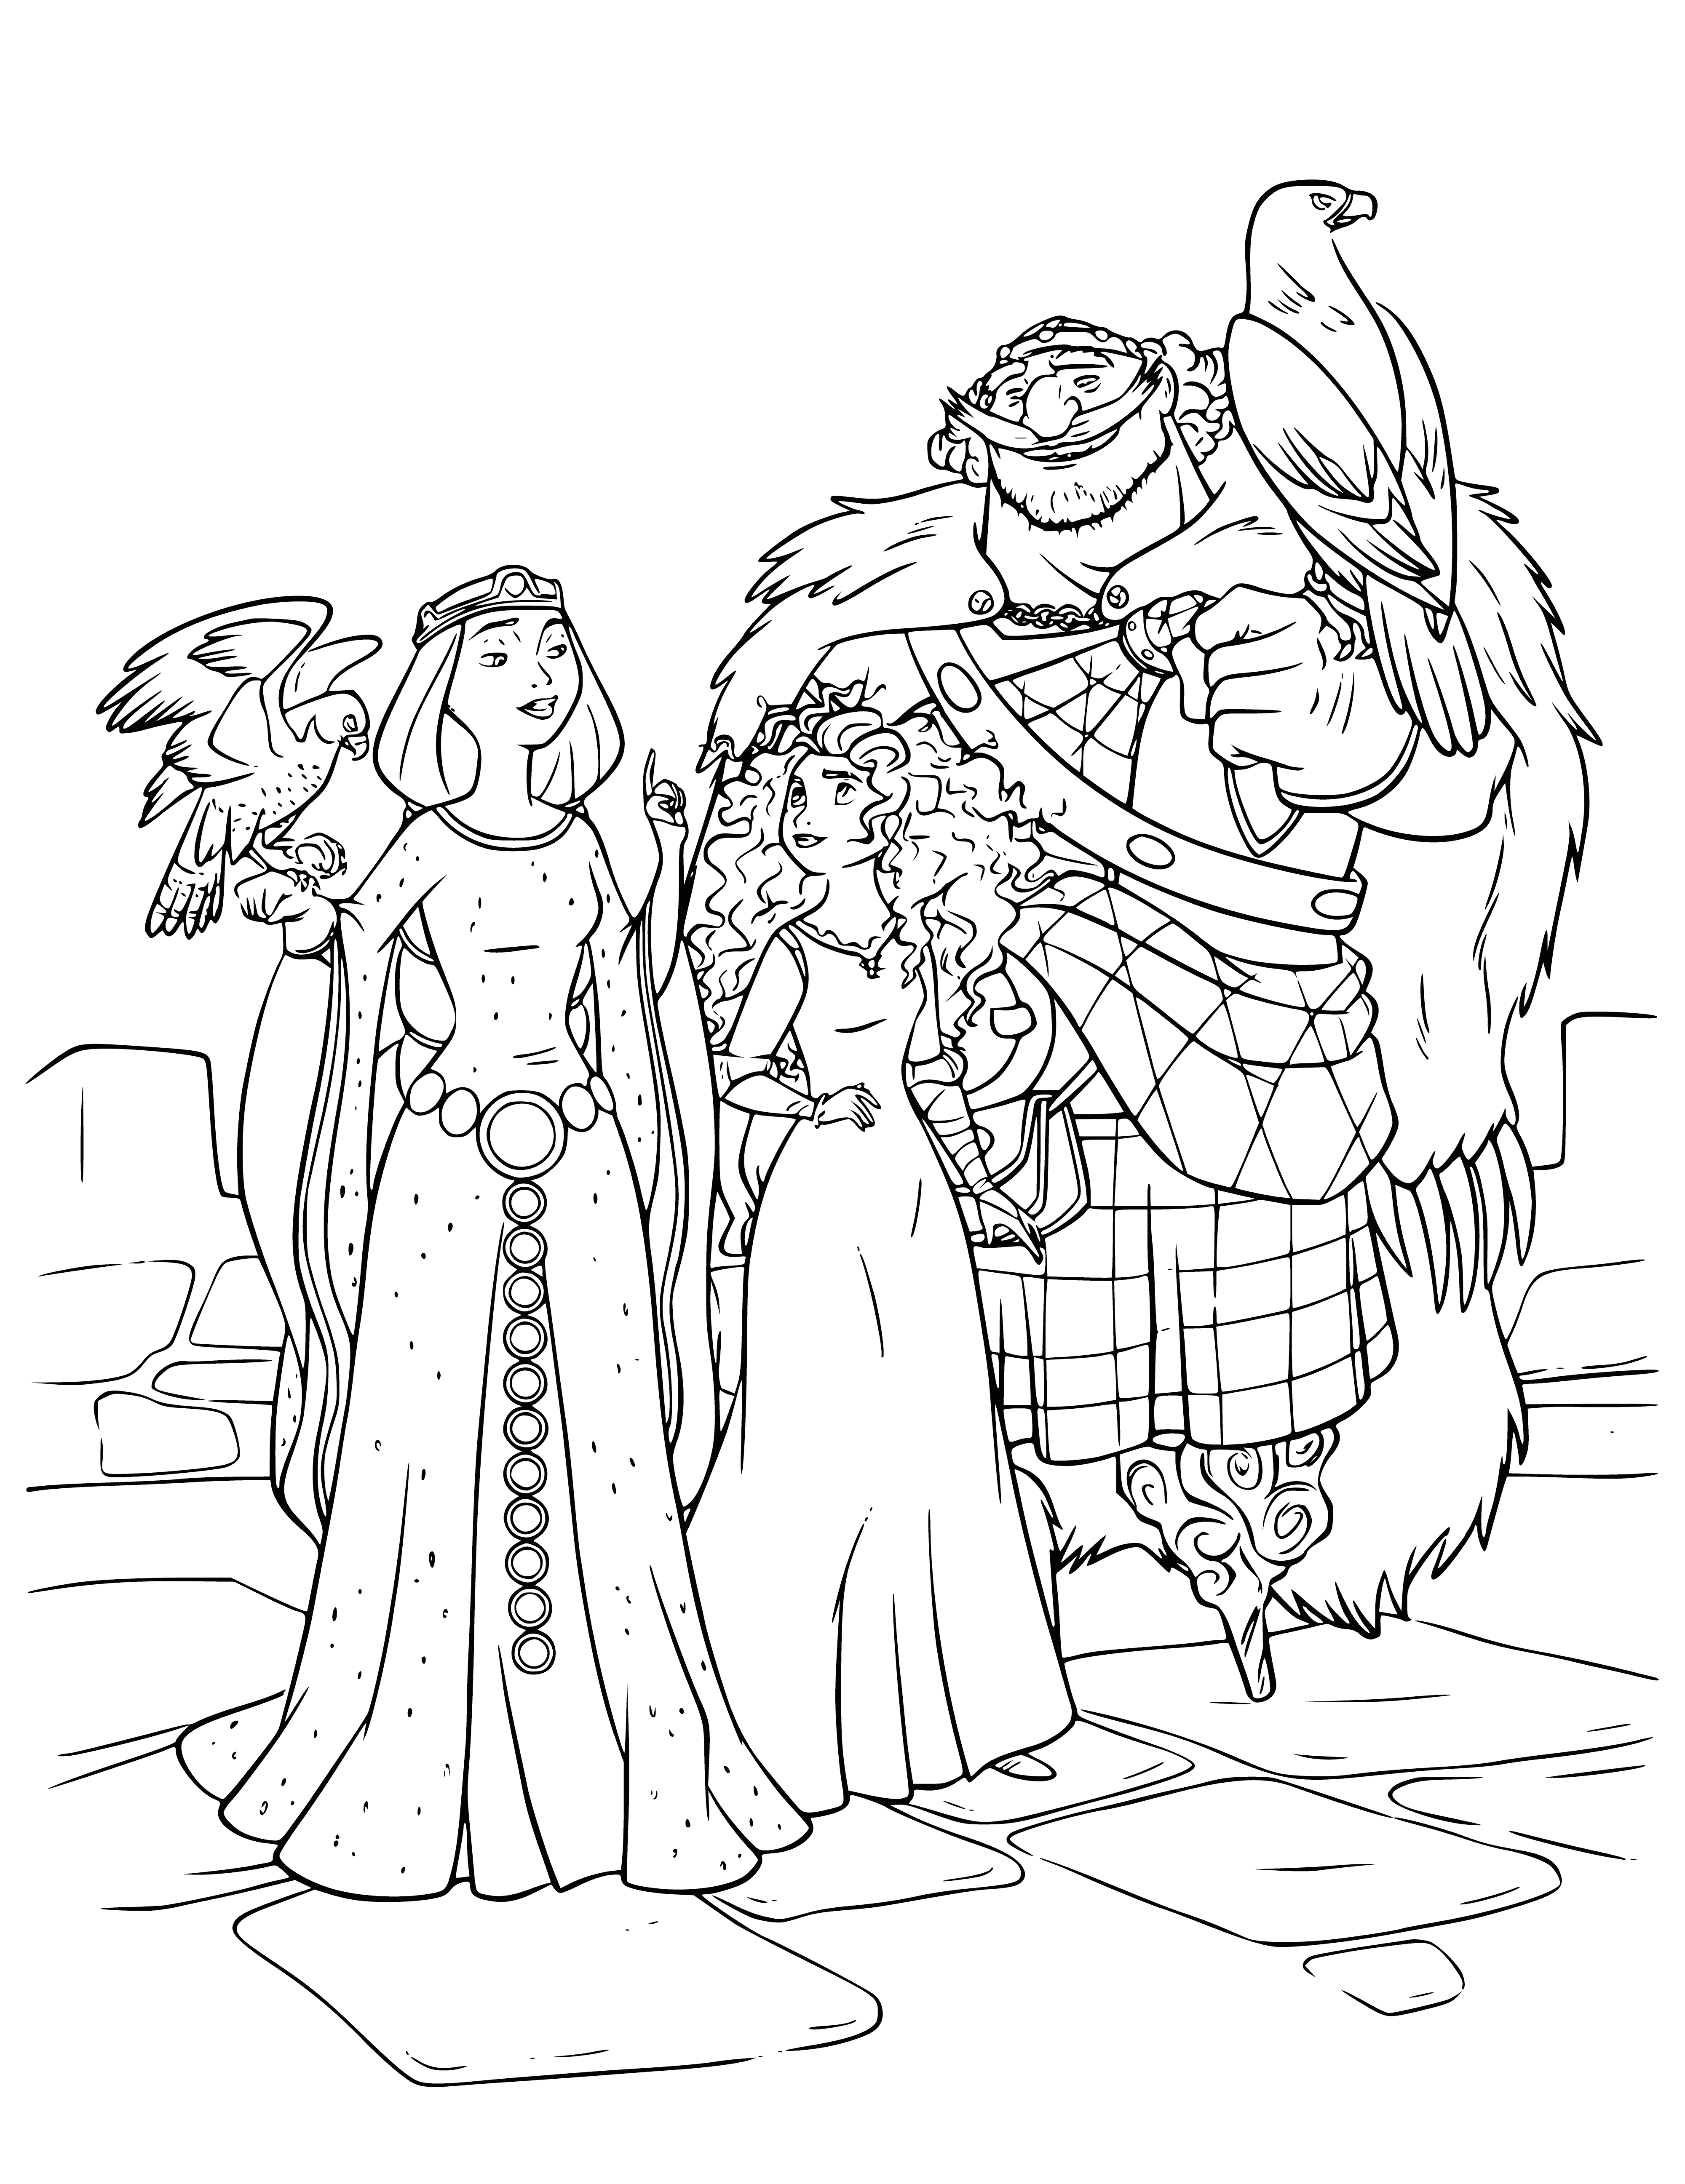 coloring page: Queen Elinor and Princess Merida in teal and gold and King Fergus in a kilt red cape and small crown stand regally together. #family